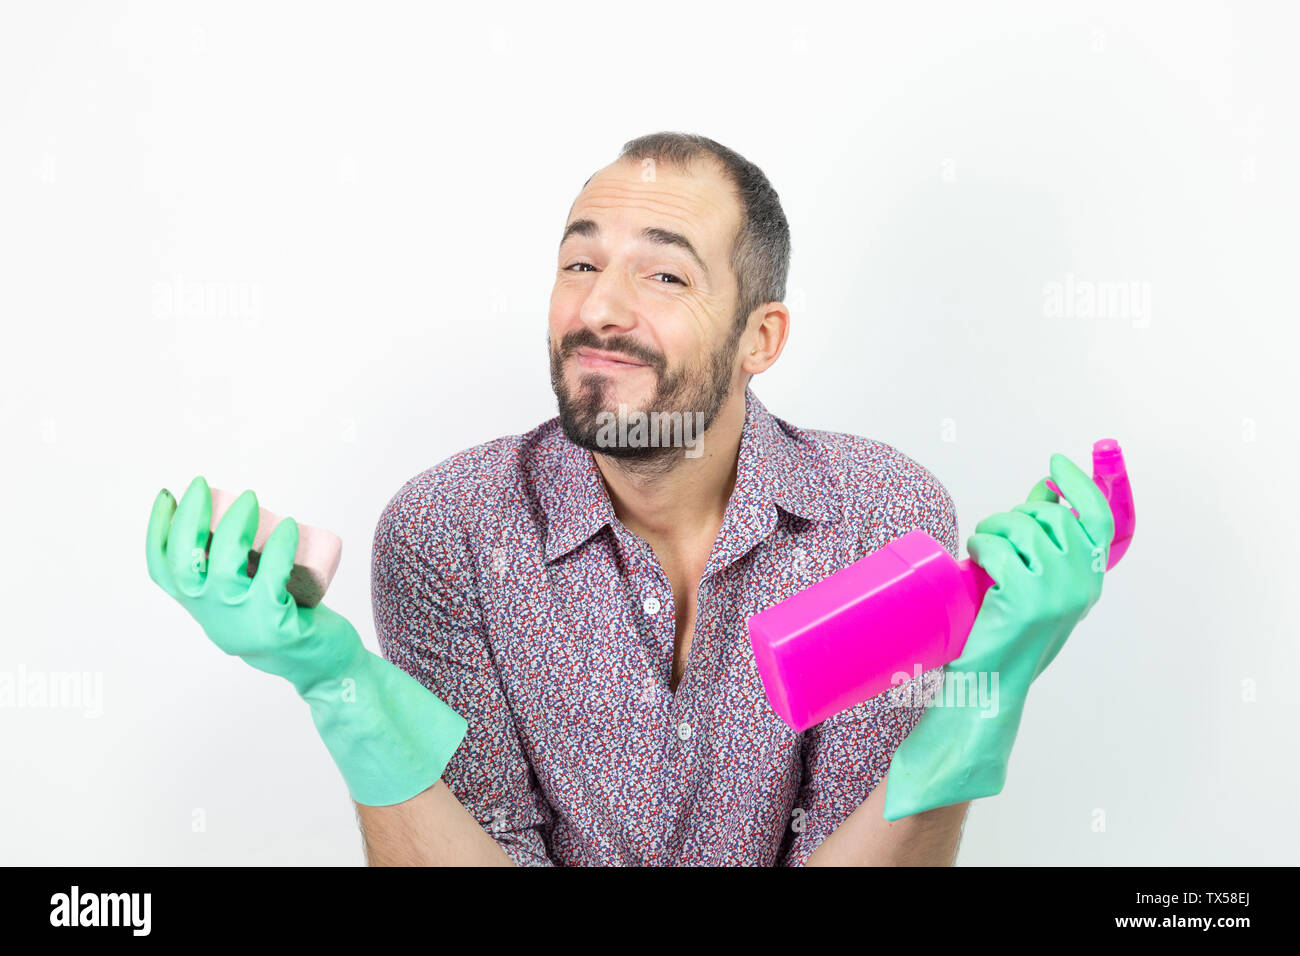 A man with cleaning products. Stock Photo